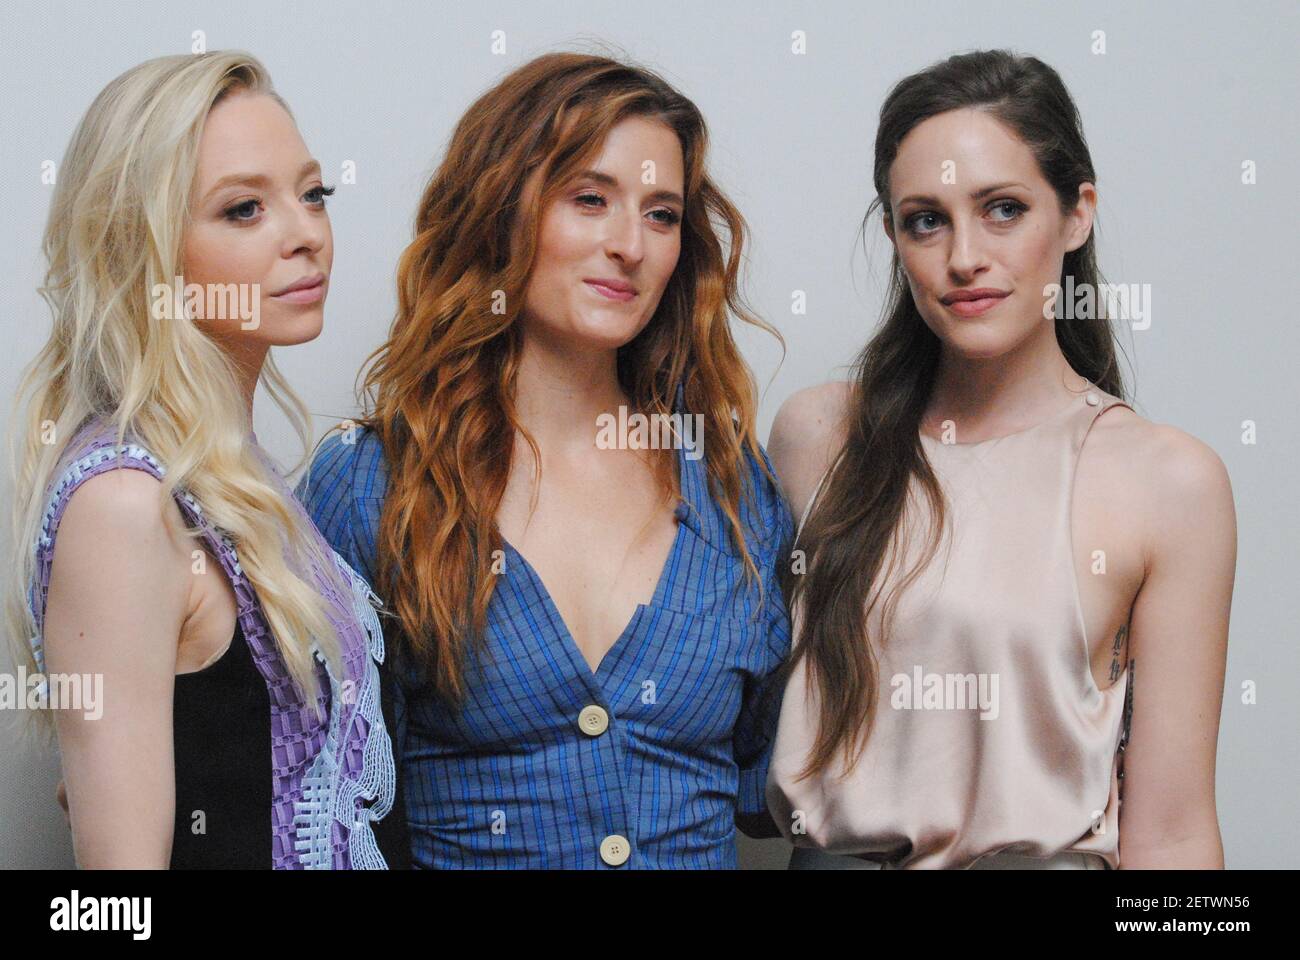 brug Gå til kredsløbet snemand Portia Doubleday, Grace Gummer and Carly Chaikin at the Hollywood Foreign  Press Association press conference for "Mr. Robot" held in Los Angeles, CA  on June 05, 2017. (Photo by Yoram Kahana/Shooting Star) **